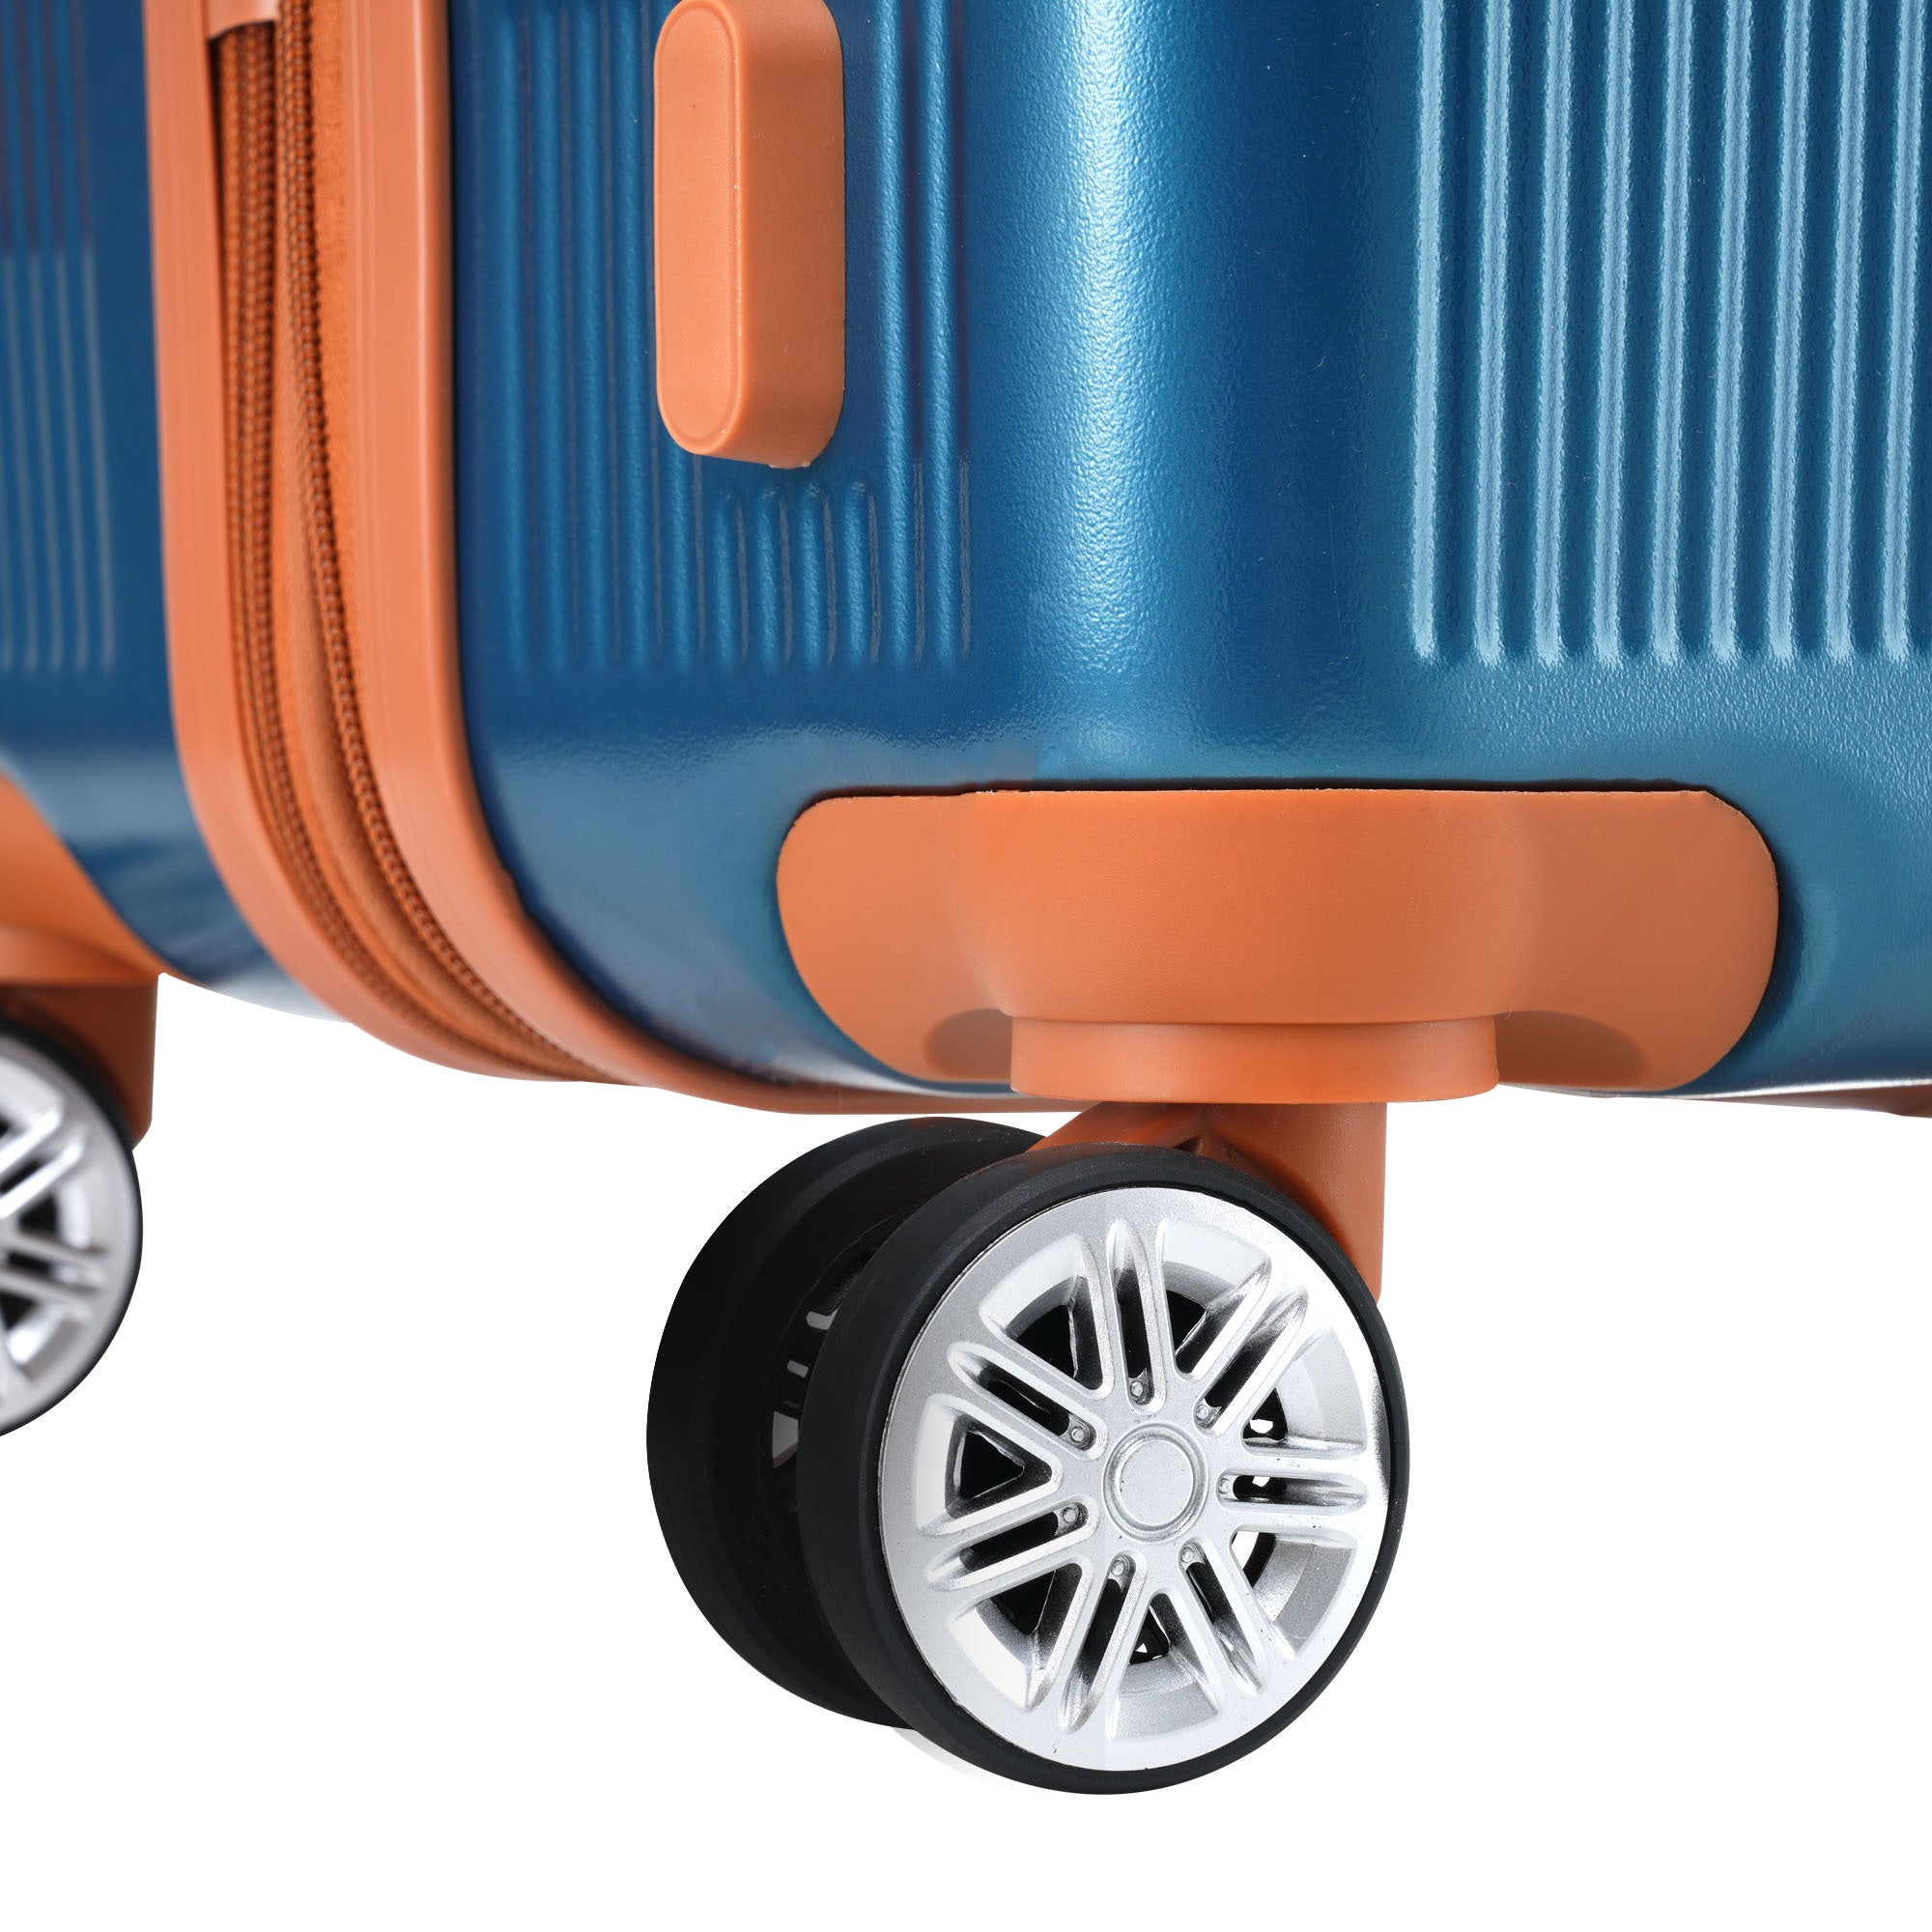 Hardshell Luggage Sets 3 Piece double spinner 8 wheels blue-abs